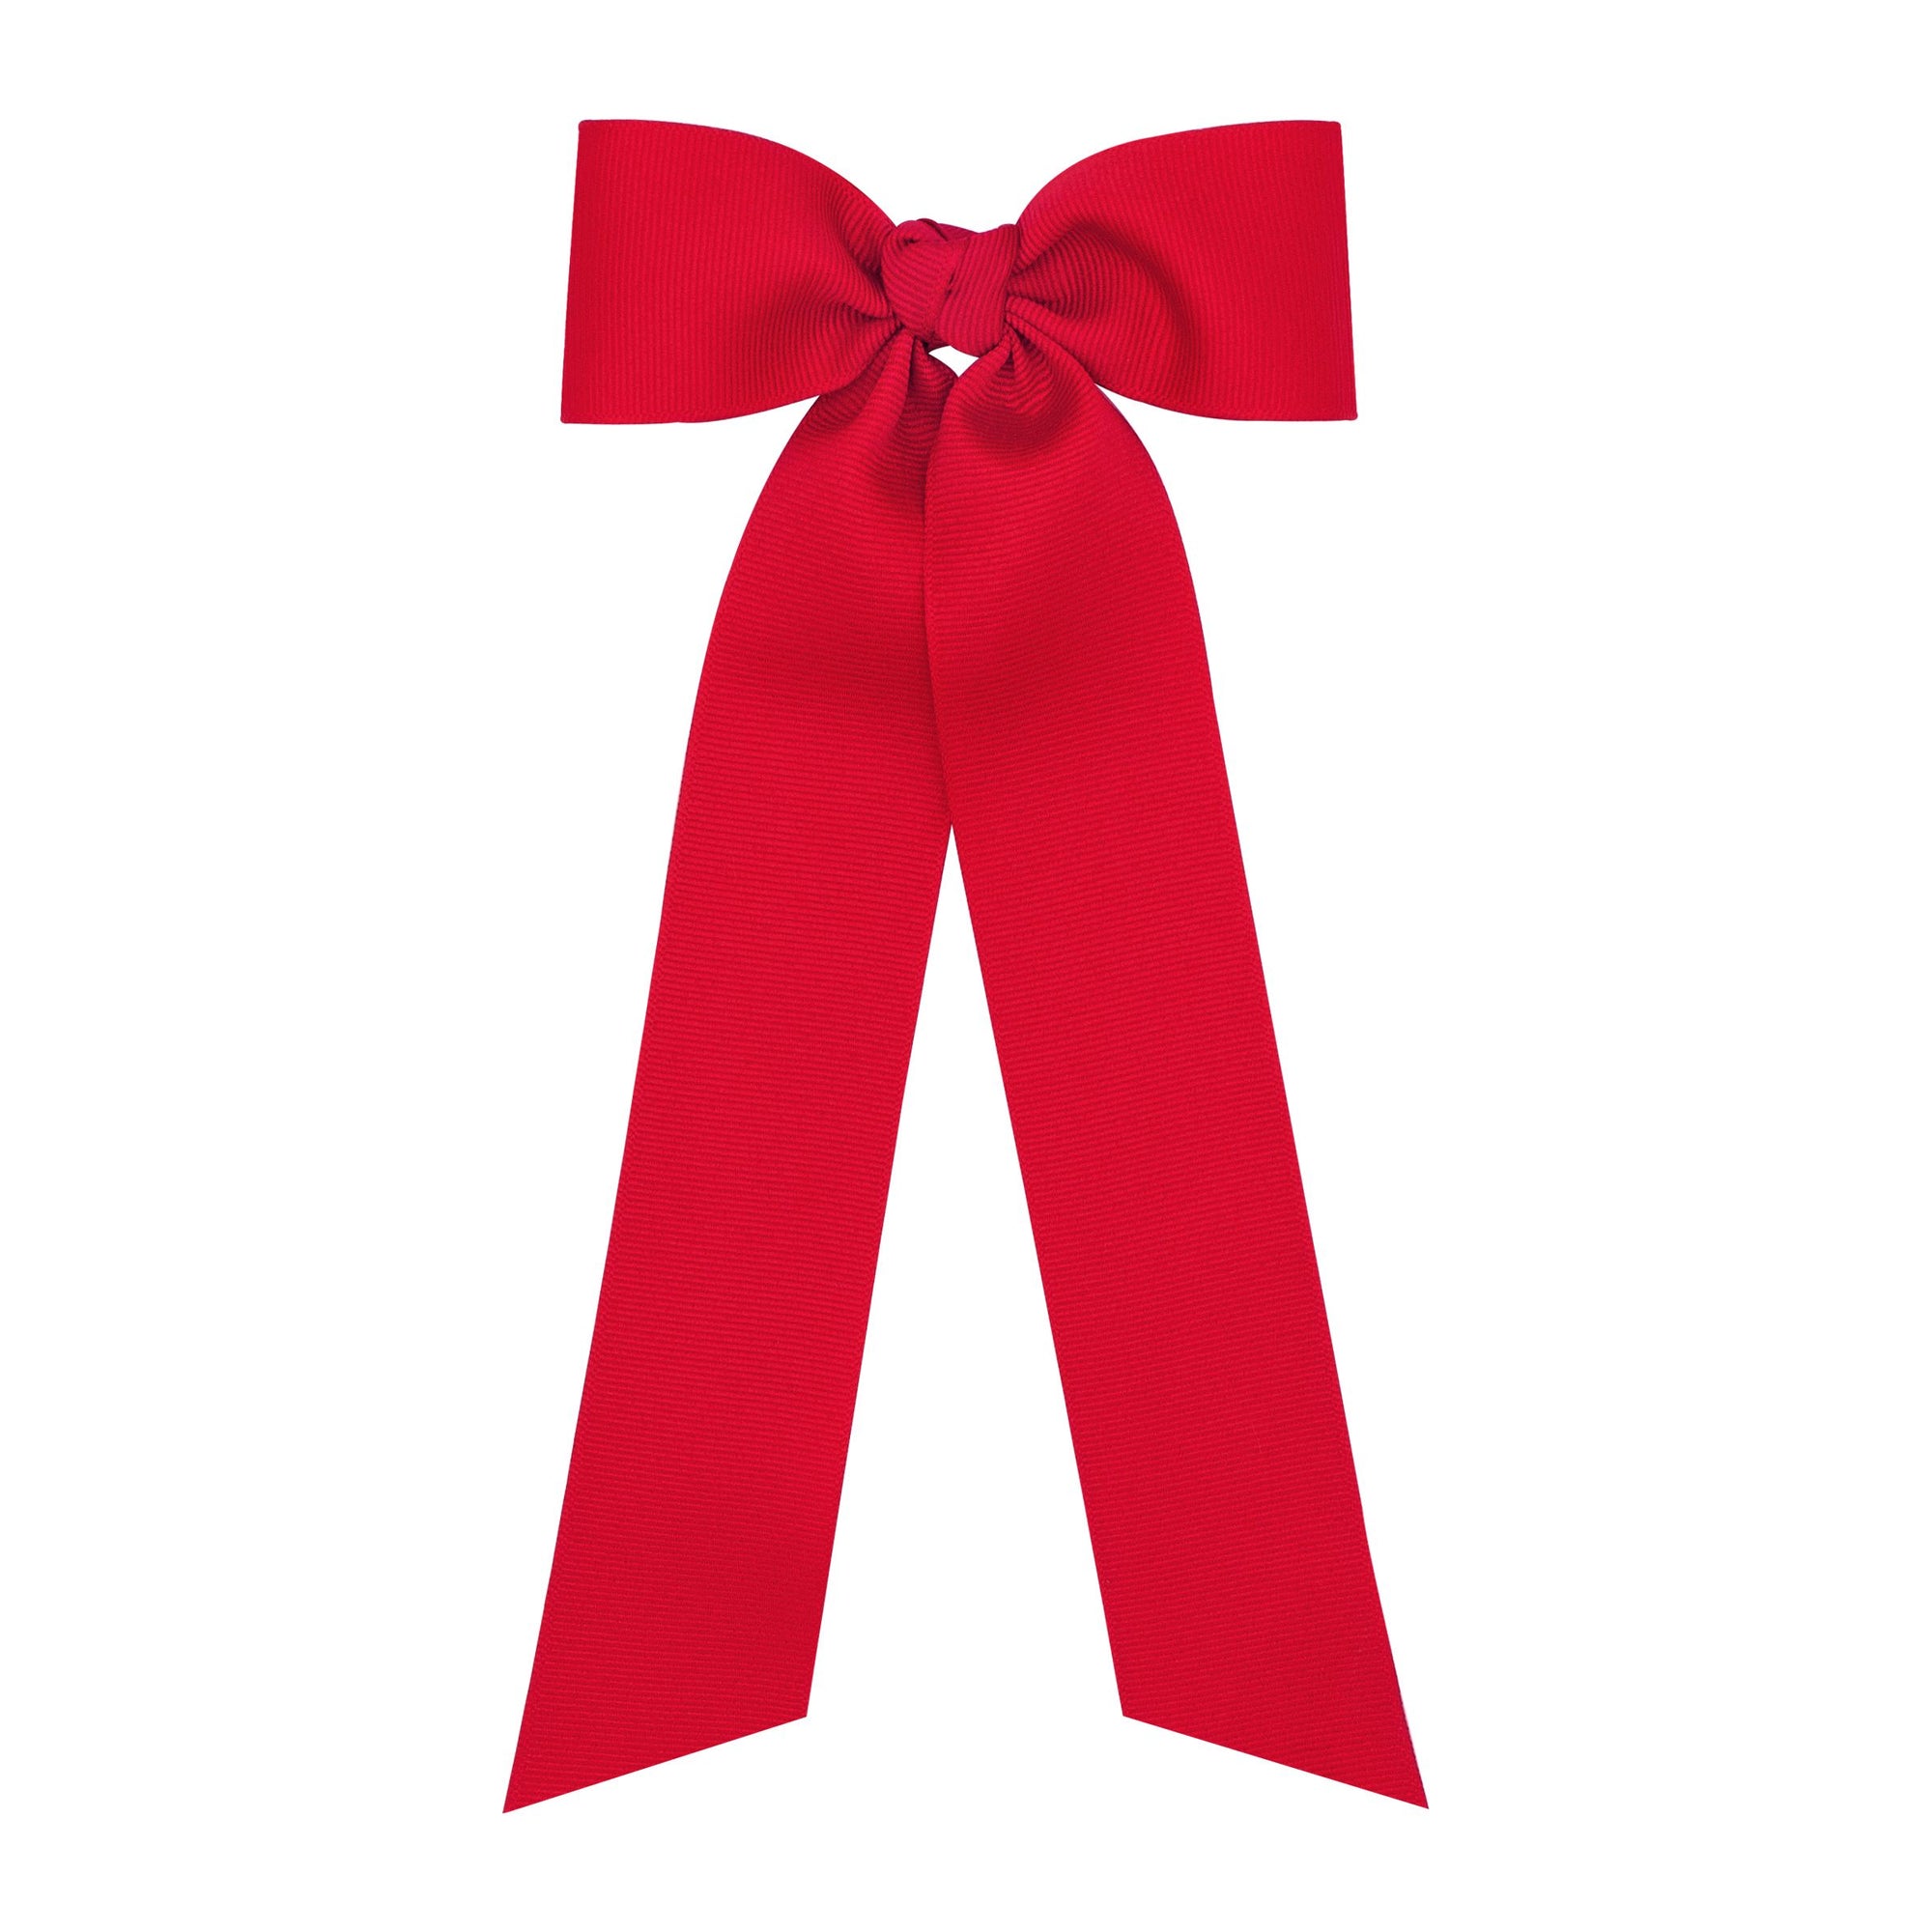 wee ones: Medium Grosgrain Hair Bowtie with Knot Wrap and Streamer Tails - Red